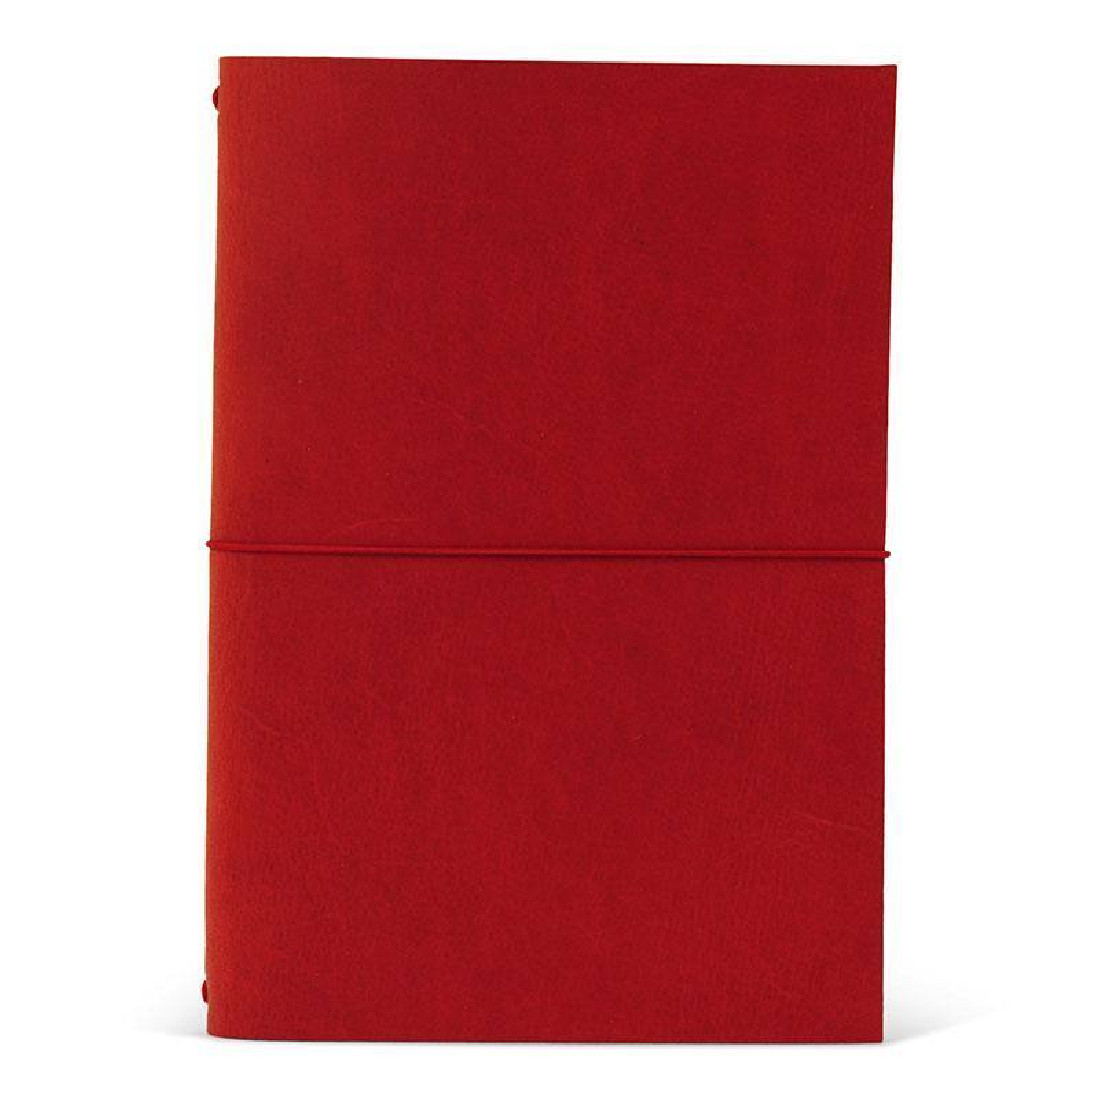 Paper Republic grand voyageur [xl] red leather journal